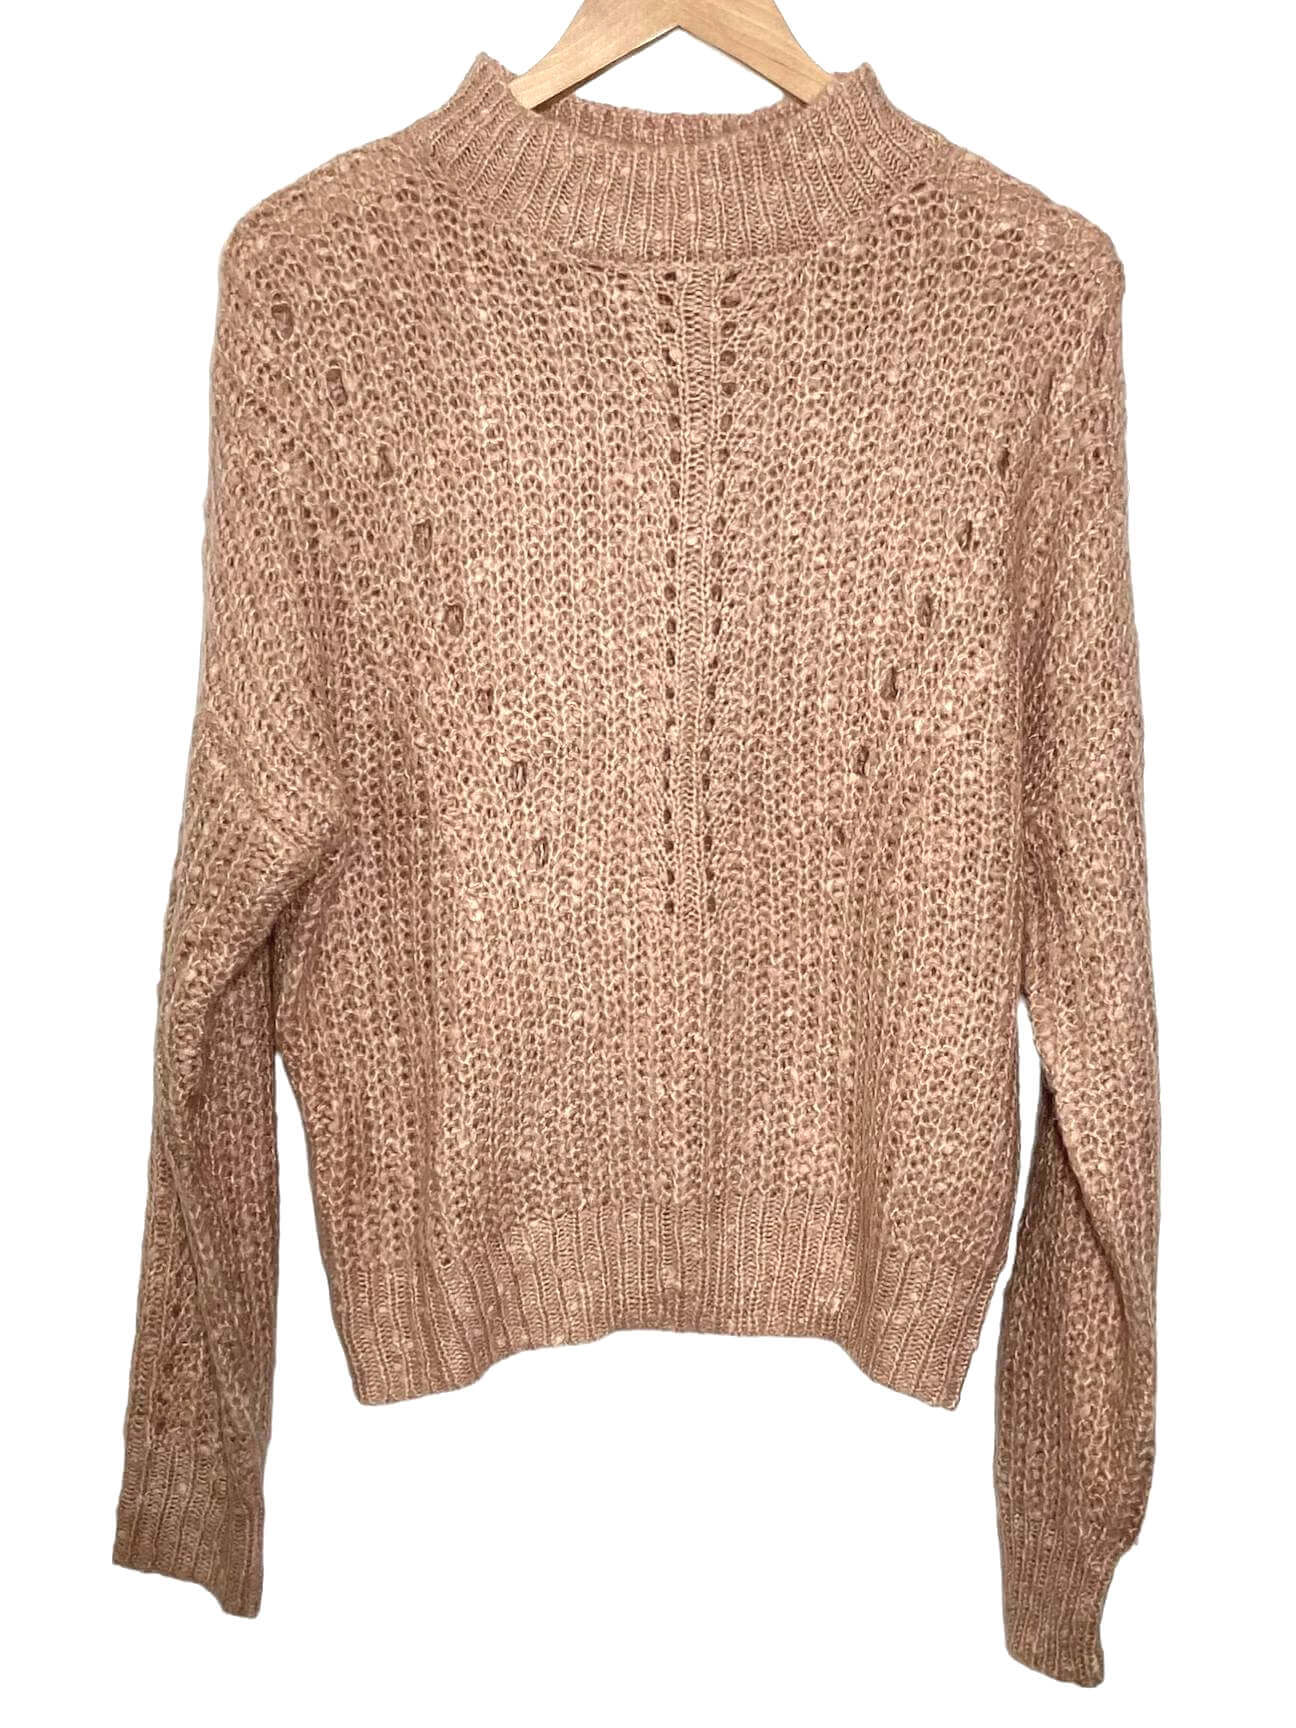 Soft Summer ALMOST FAMOUS almond tan open knit sweater